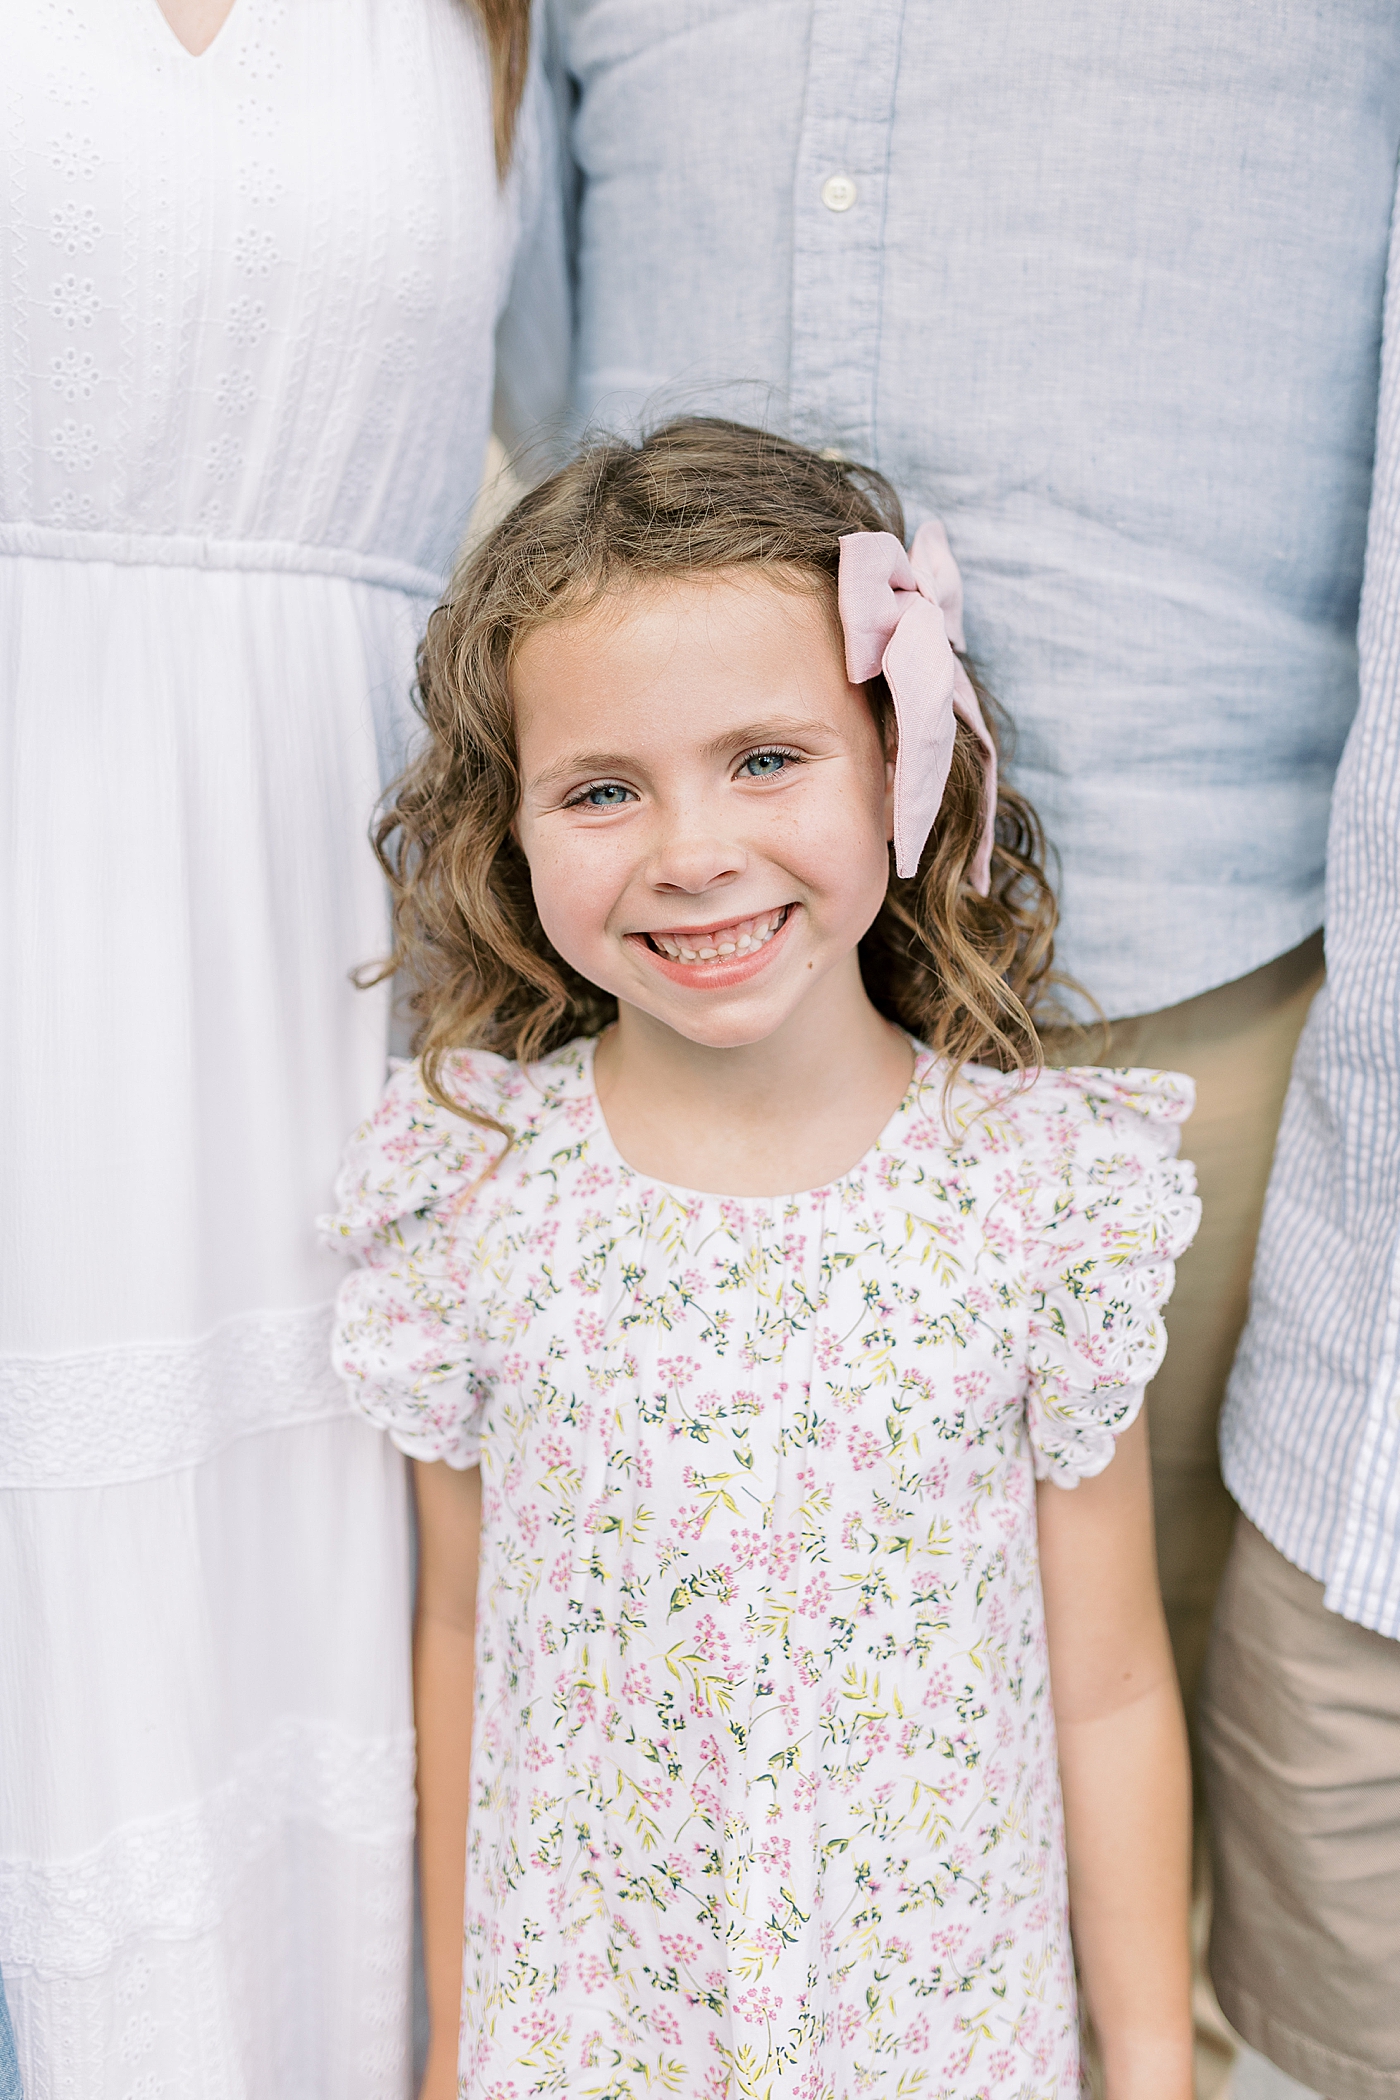 Little girl with a floral dress and pink bow smiling | Photo by Caitlyn Motycka Photography